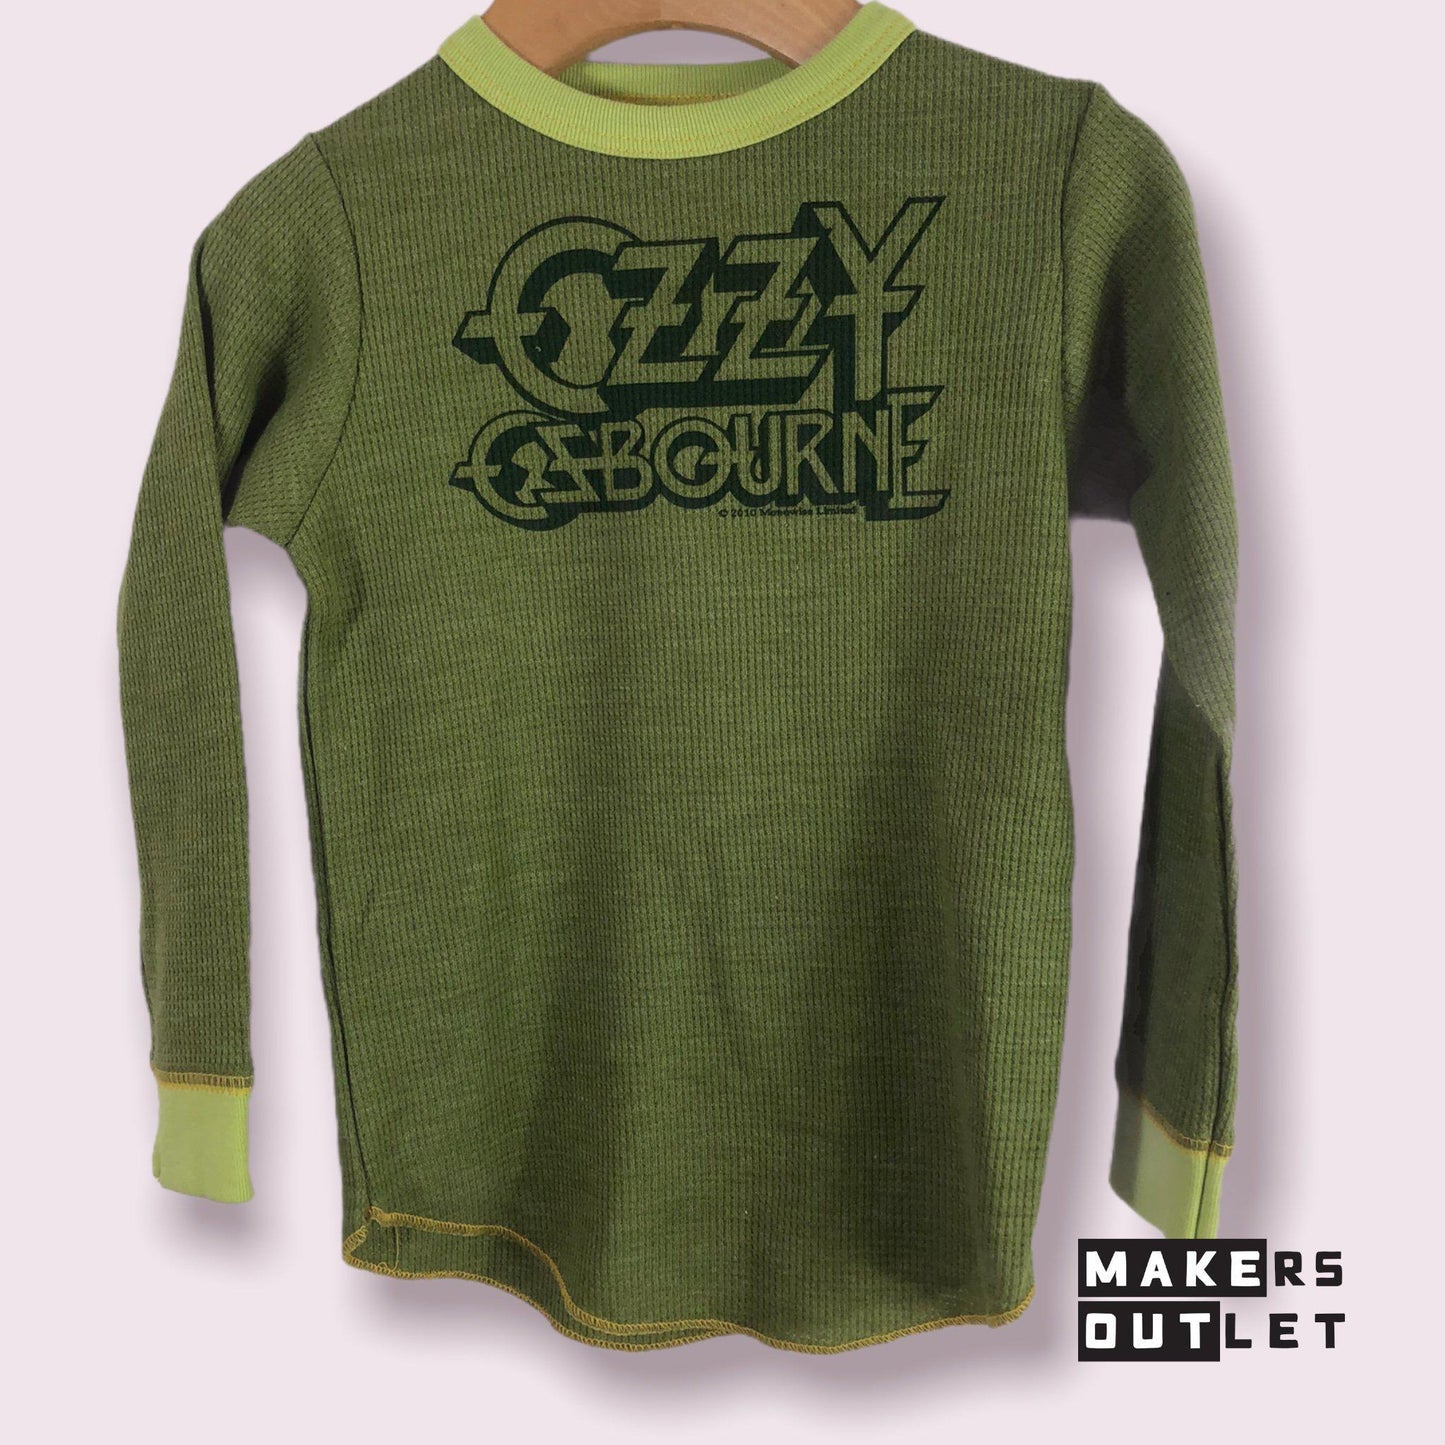 Ozzy Ozbourne Thermal Toddler T Shirt by Rowdy Sprout Size 2T-2T-